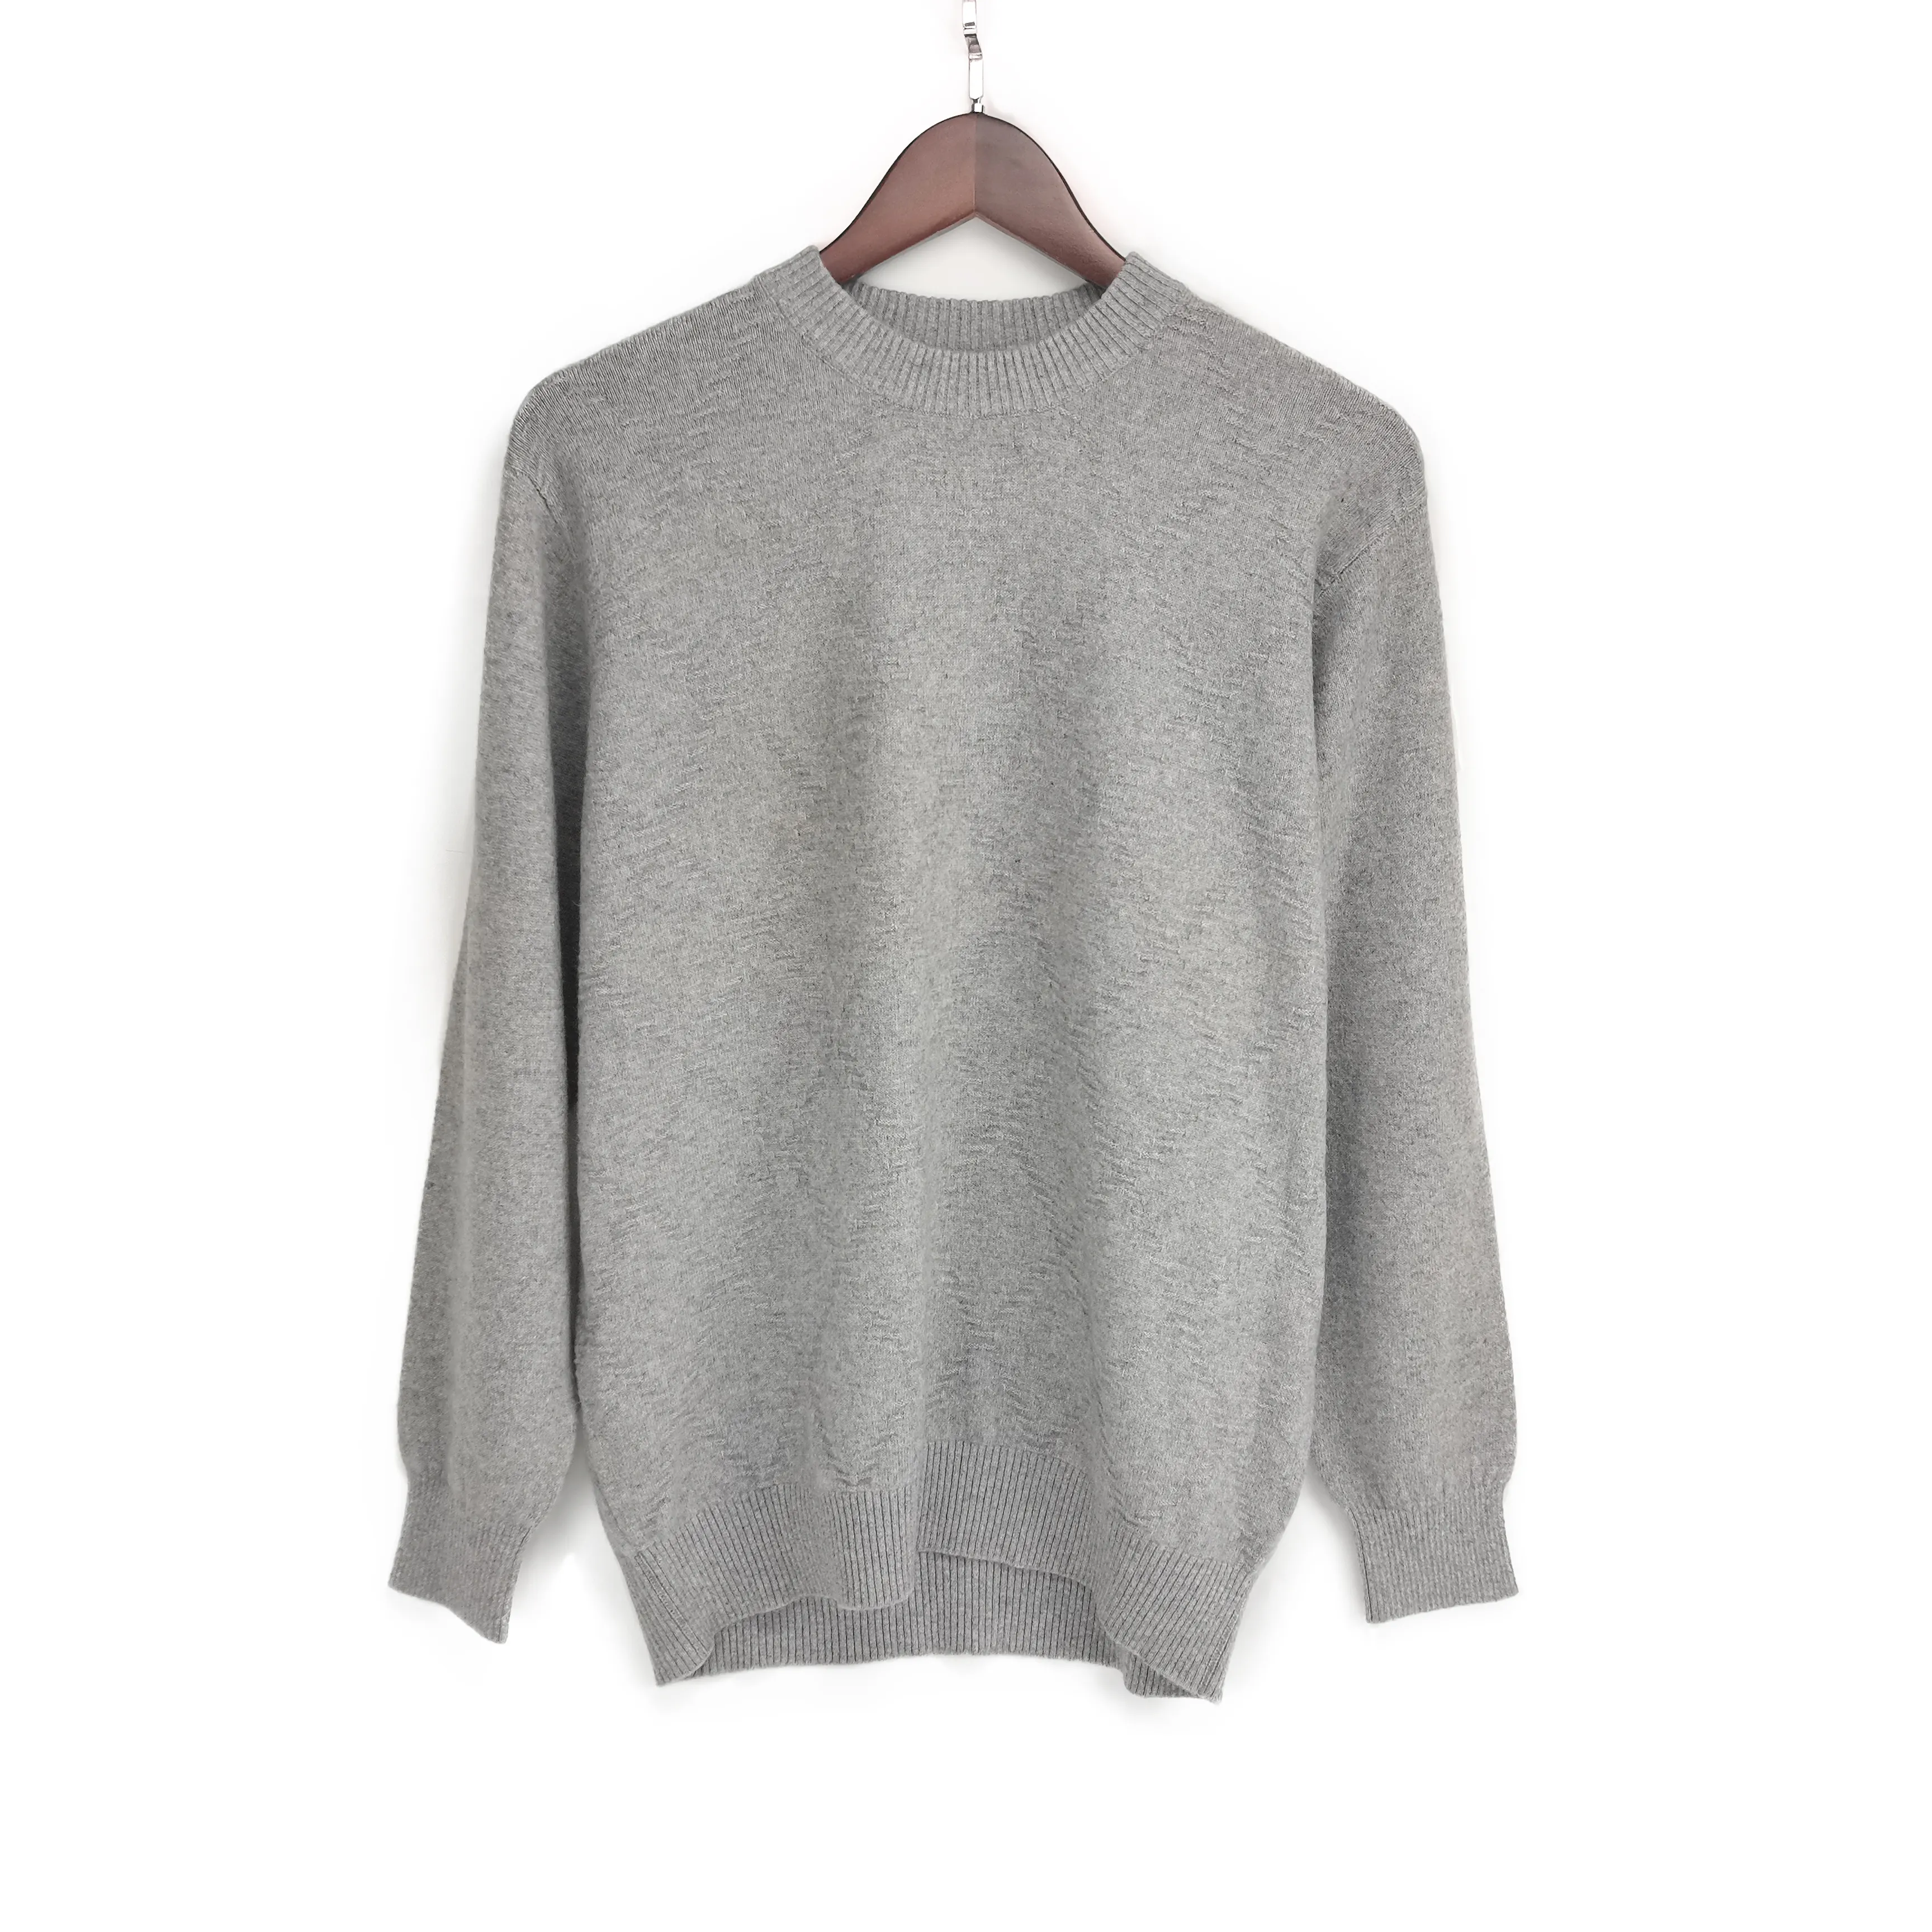 Wholesale High Quality Men Cashmere Cashmere Sweater Warm Winter Crew Neck Pullover Sweater